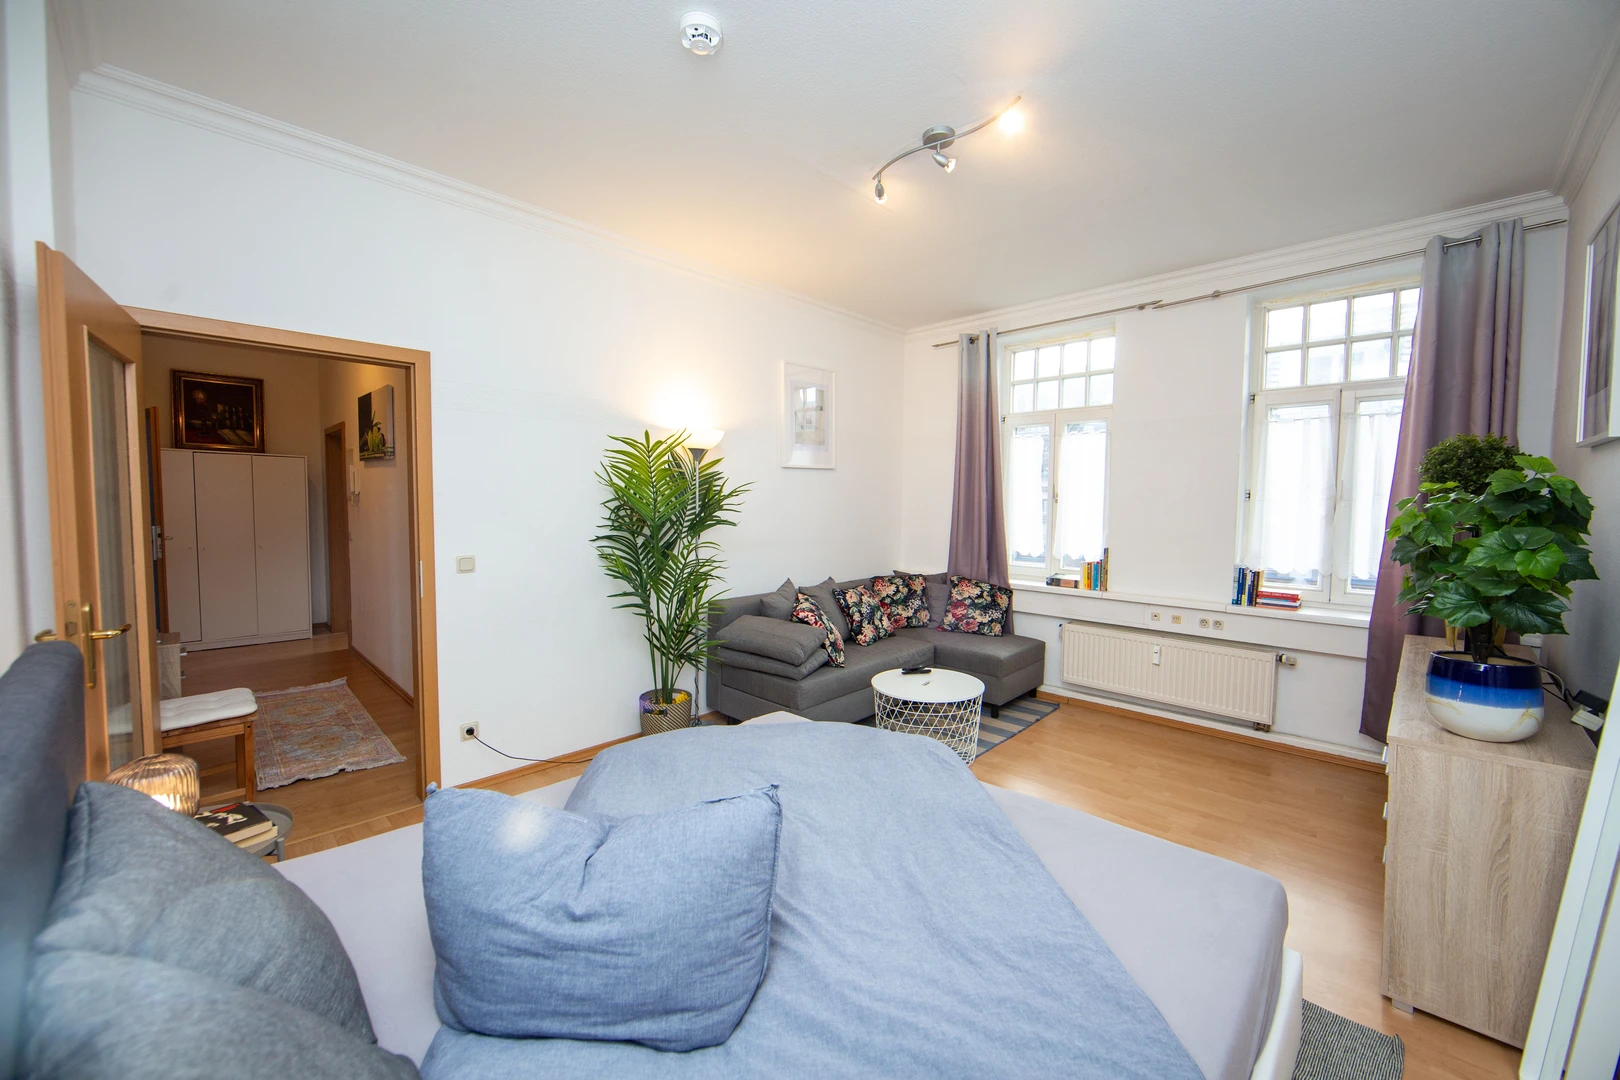 Room for rent with double bed Erfurt